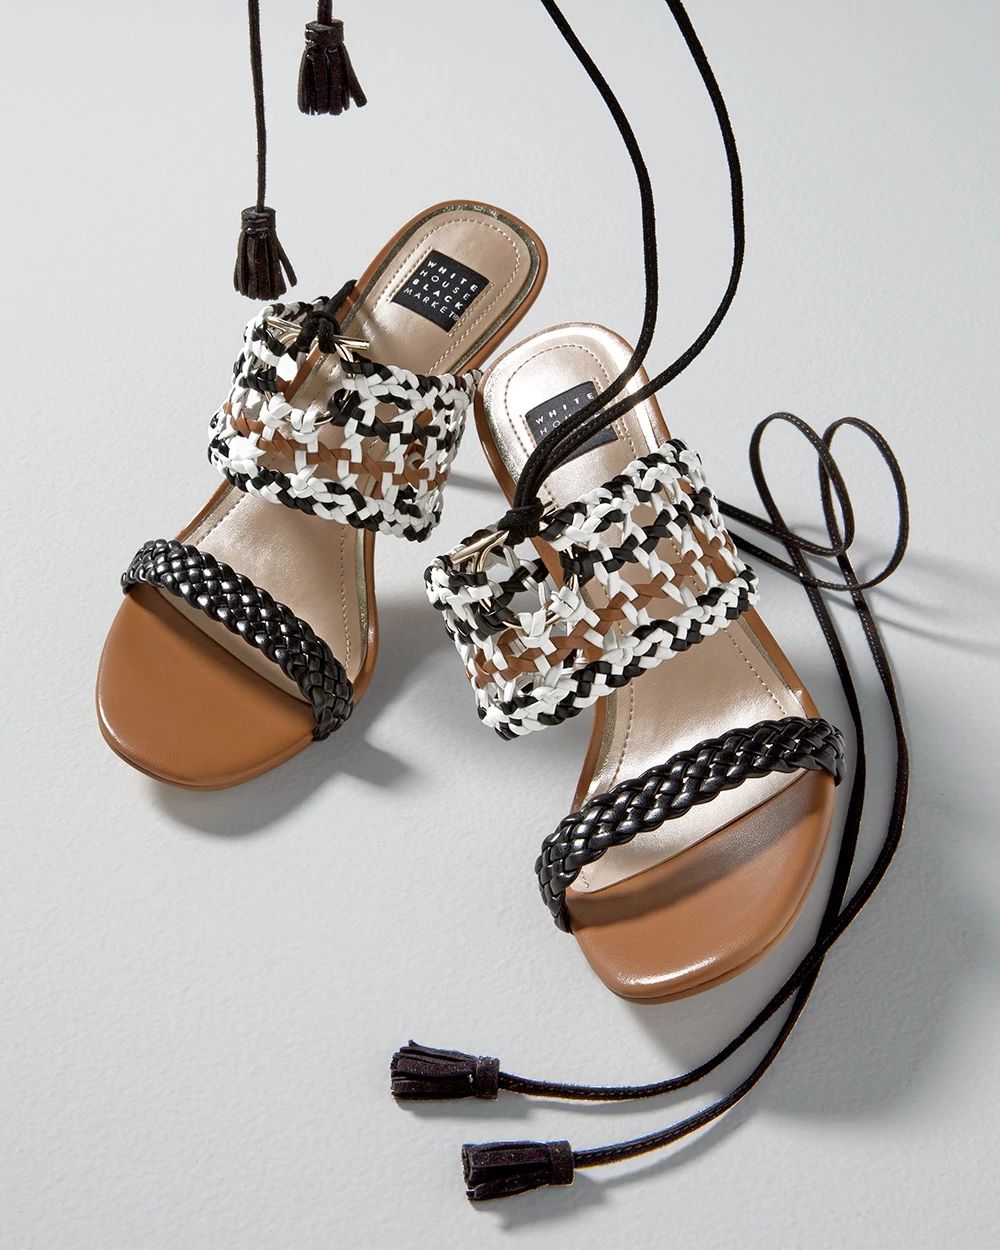 Braided Mid-Heel Gladiator Sandal click to view larger image.